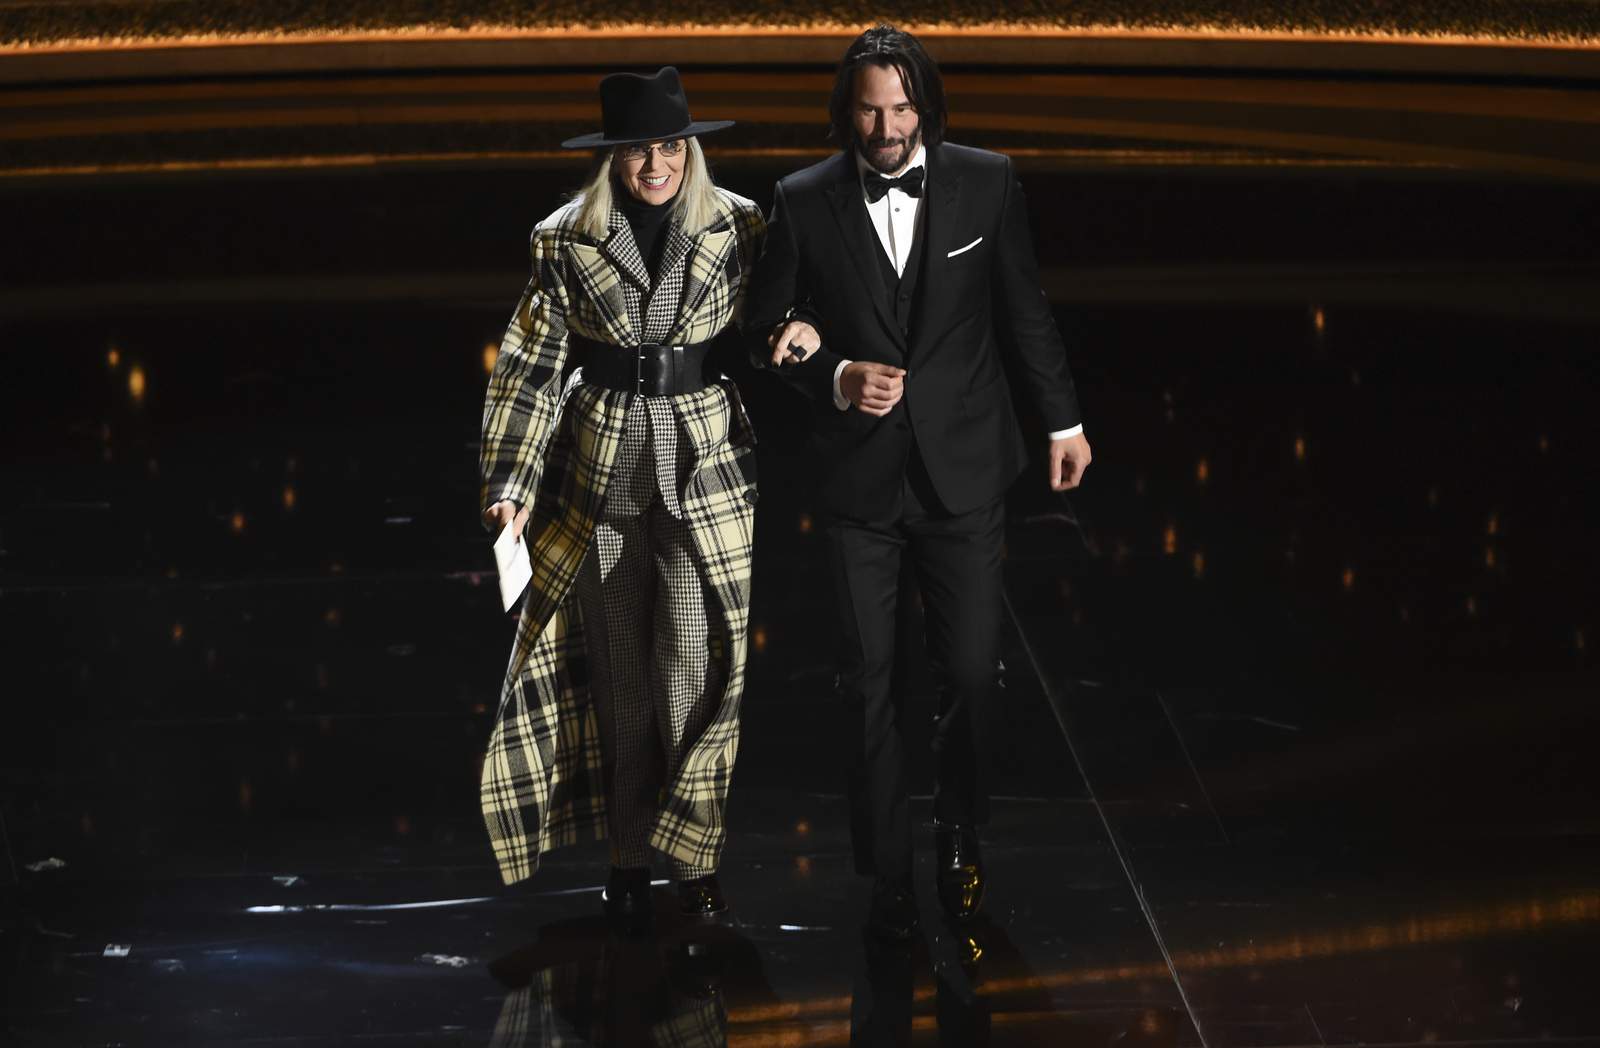 Backstage at the Oscars: Dazed winners and sweet reunions